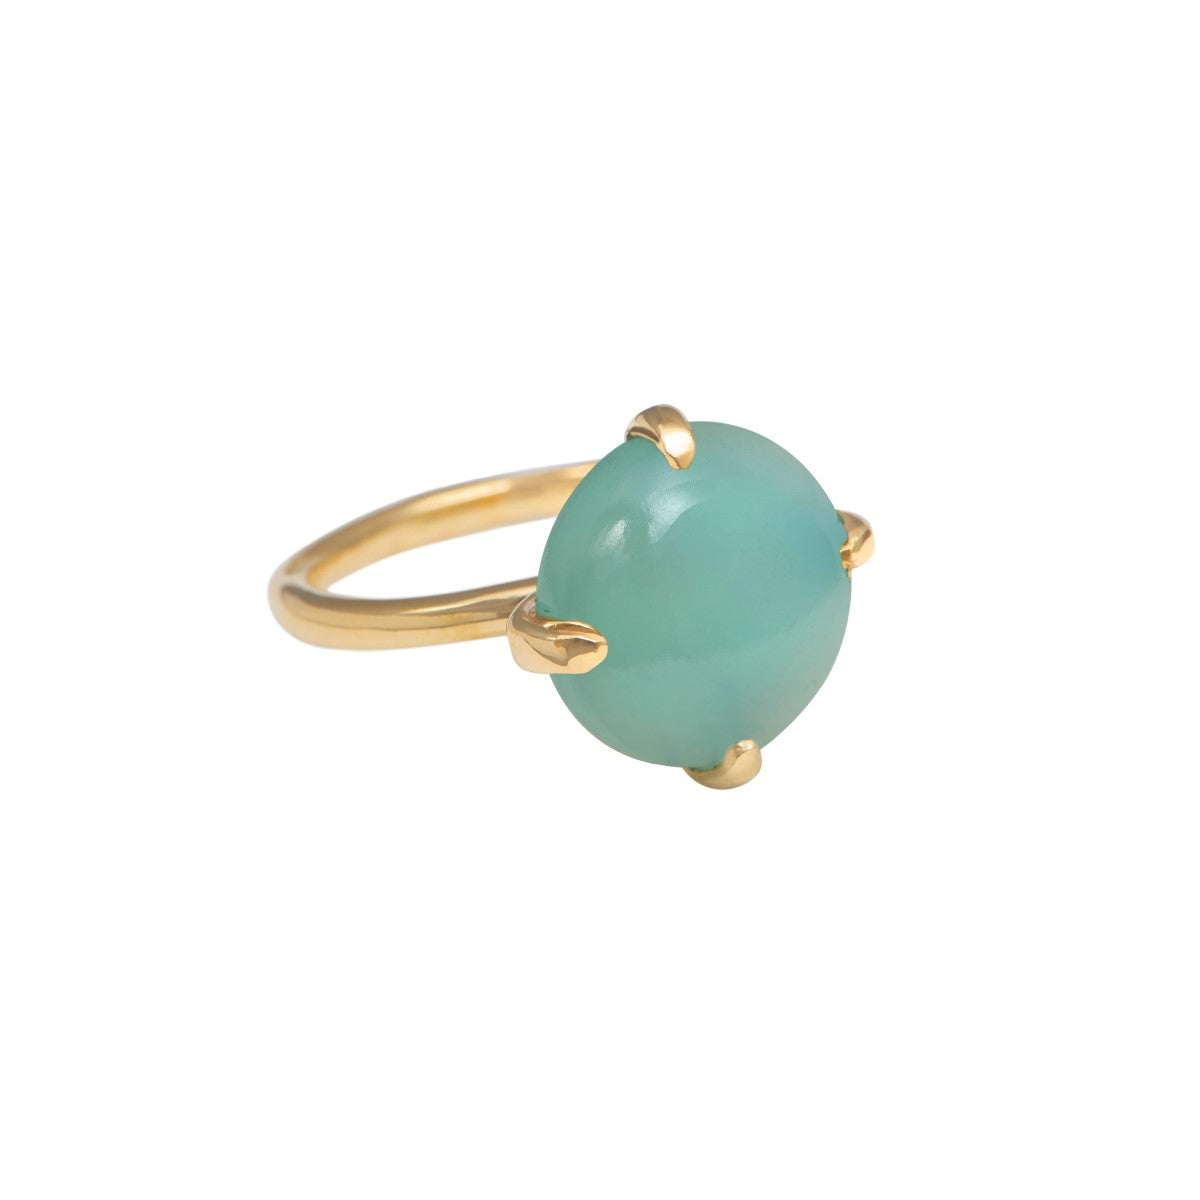 Round Cabochon Aqua Chalcedony Ring in Gold Plated Sterling Silver